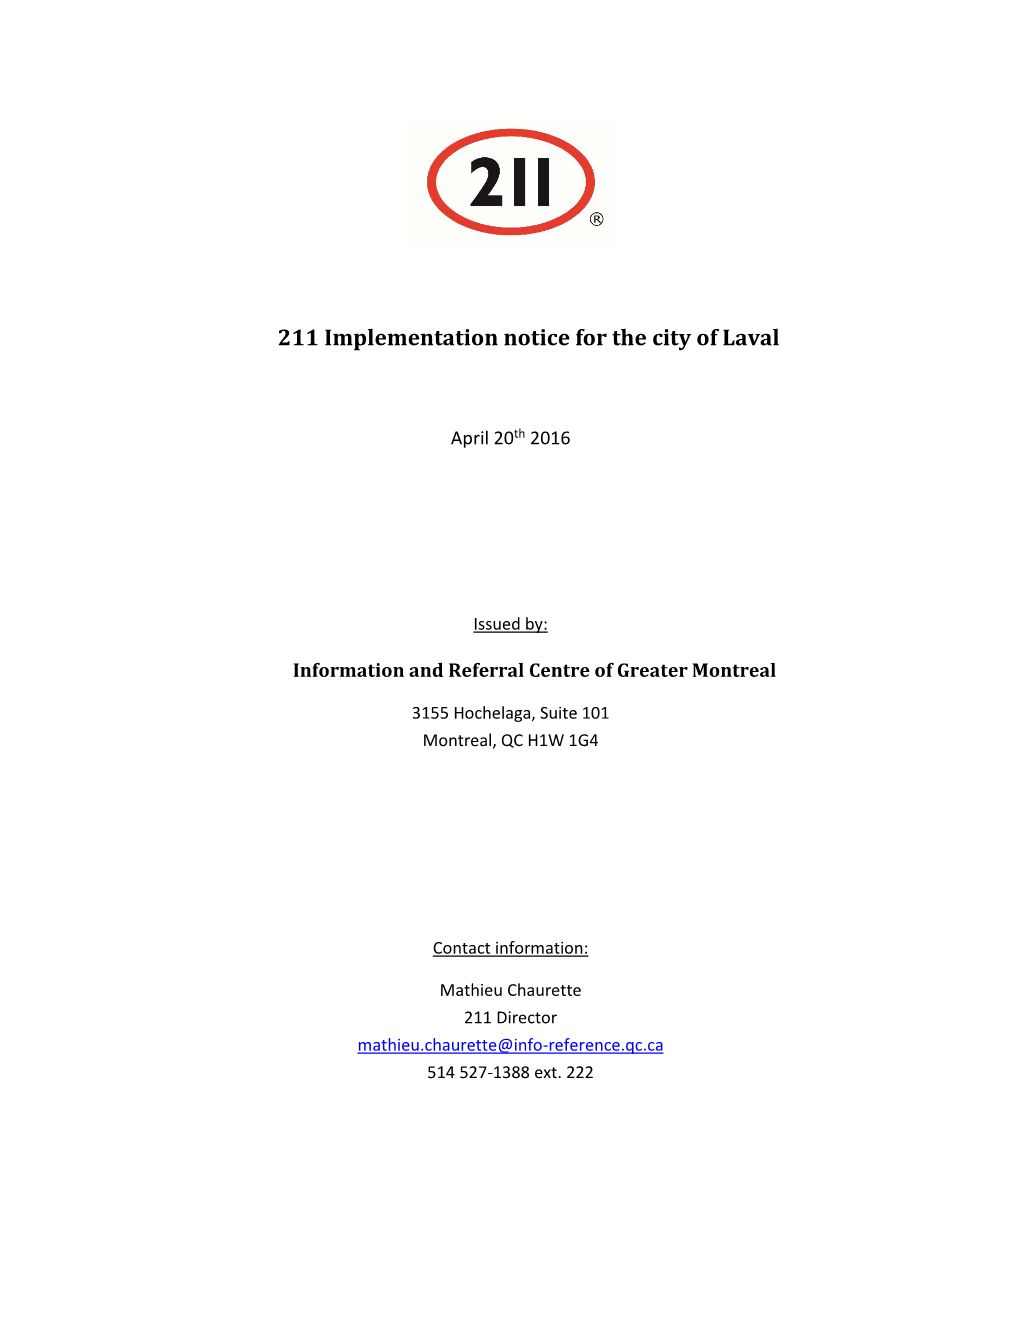 211 Implementation Notice for the City of Laval